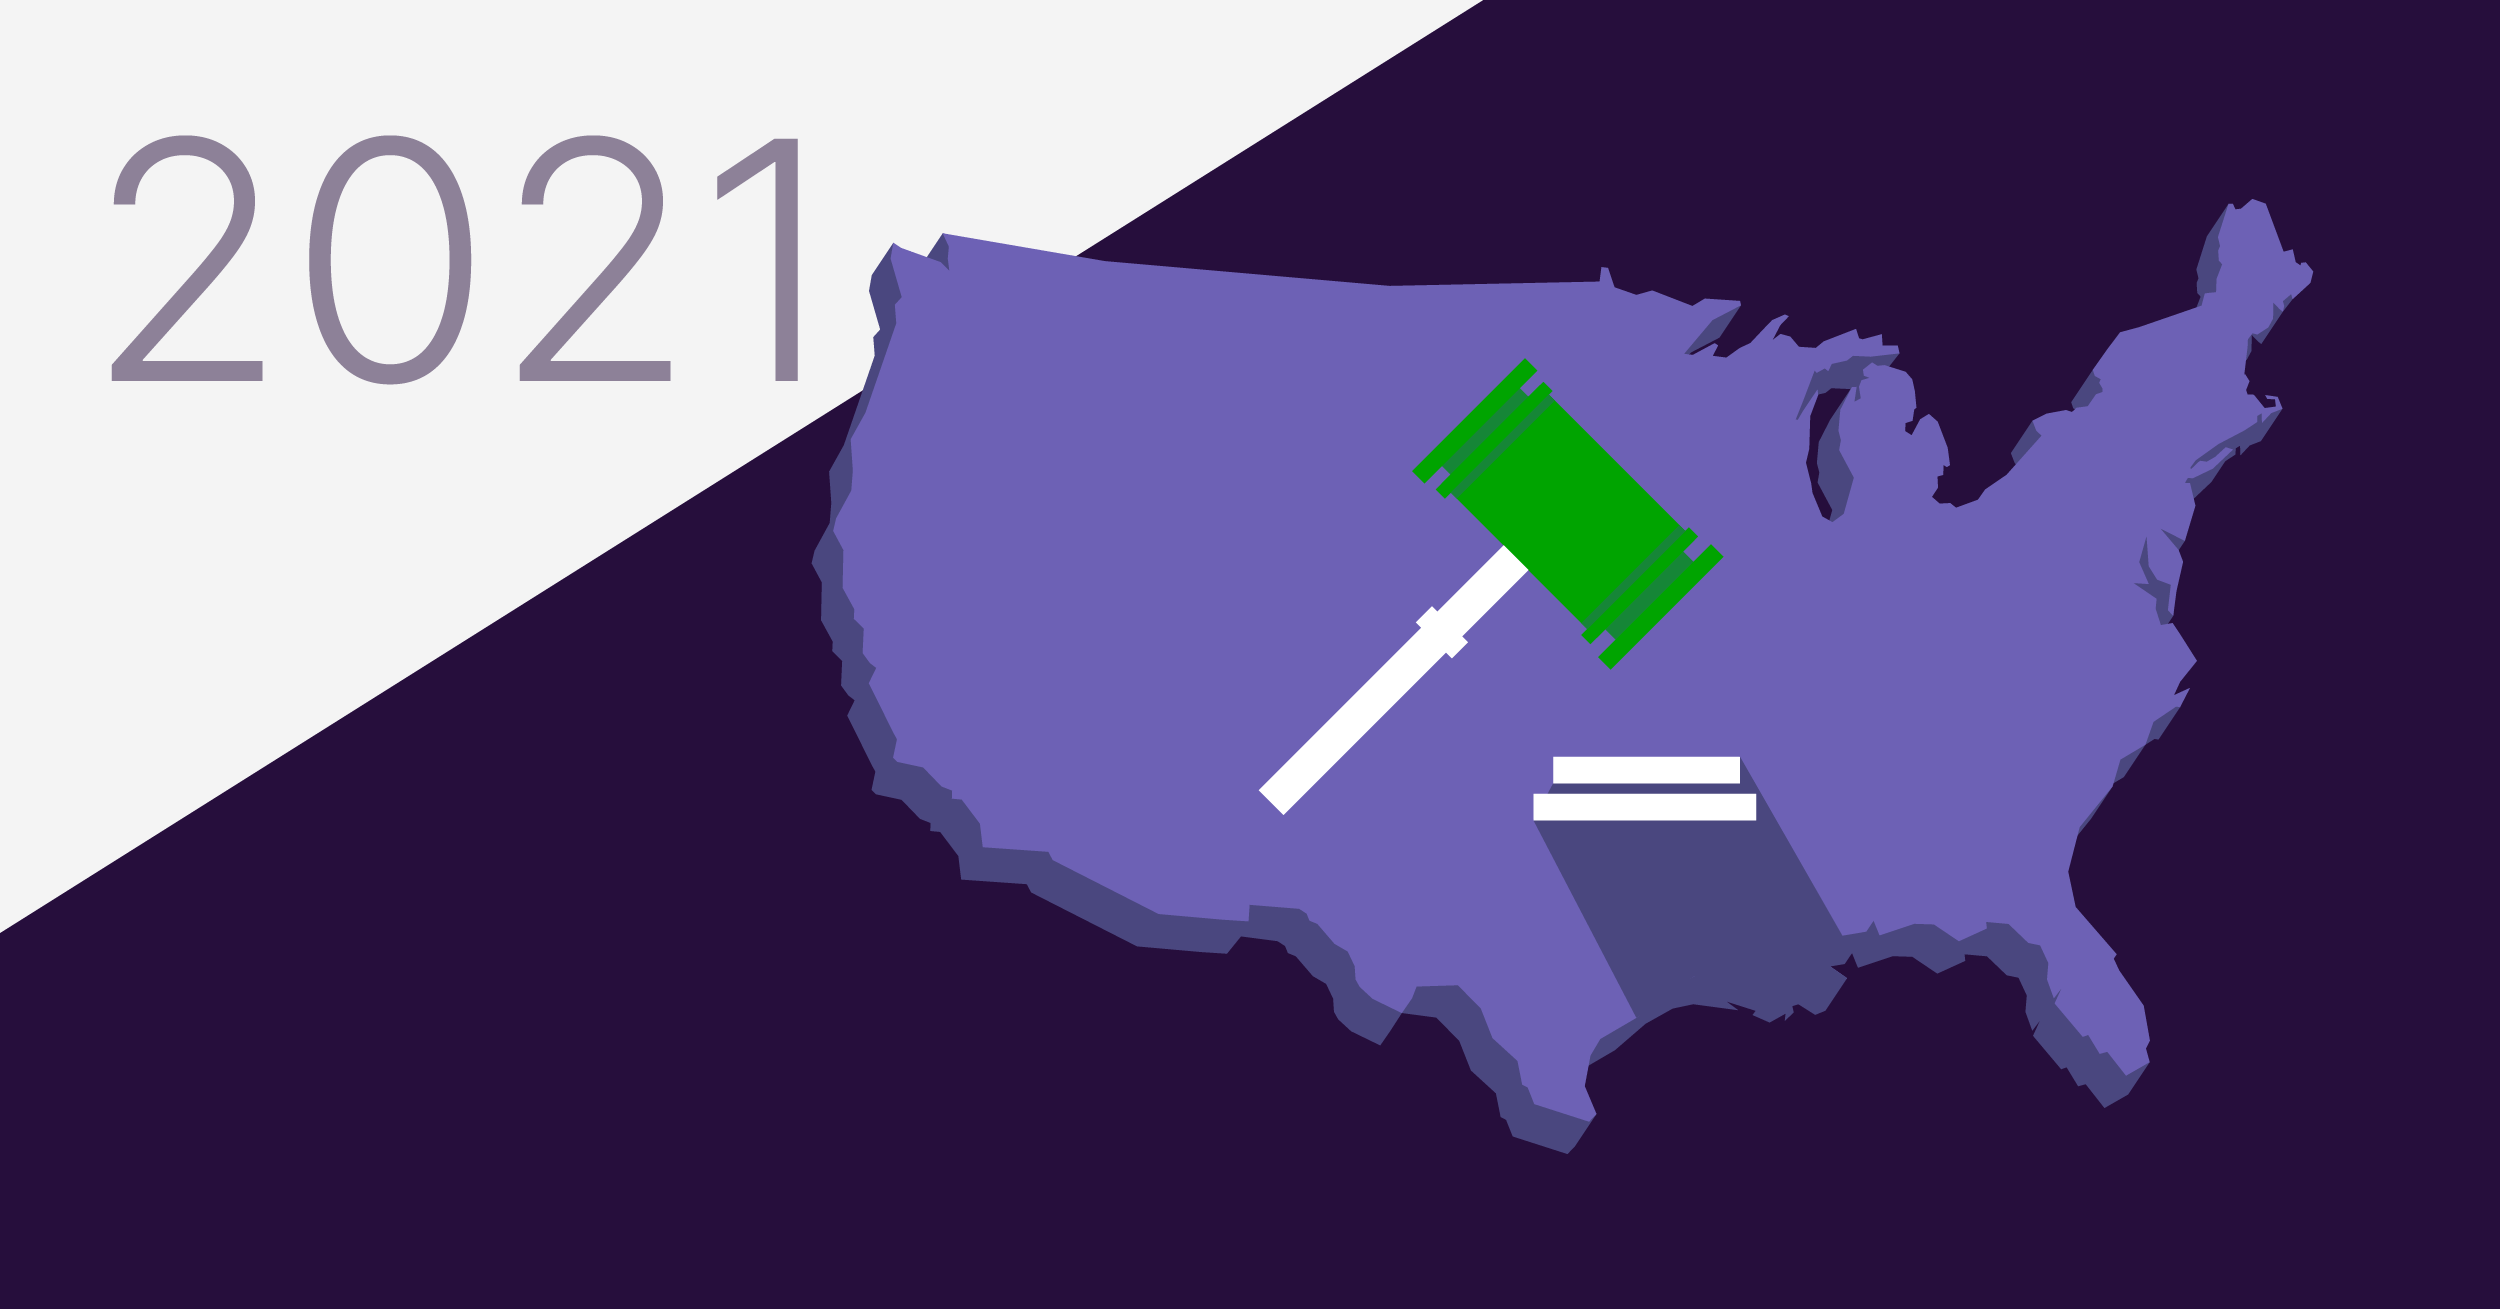 The state of pay equity laws in the U.S. in 2021